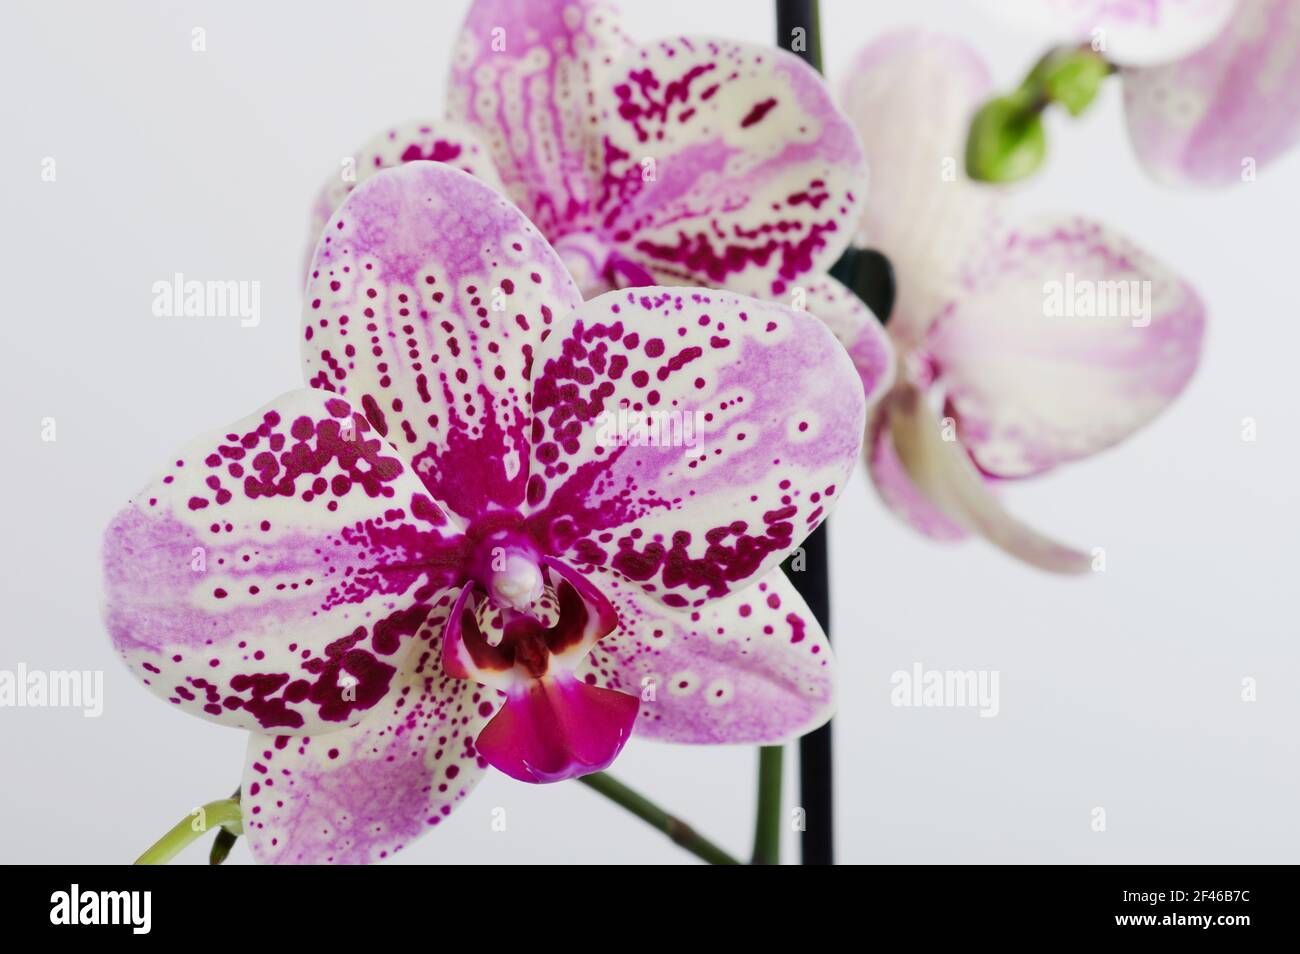 Pink blossom of orchid flower on white background Stock Photo